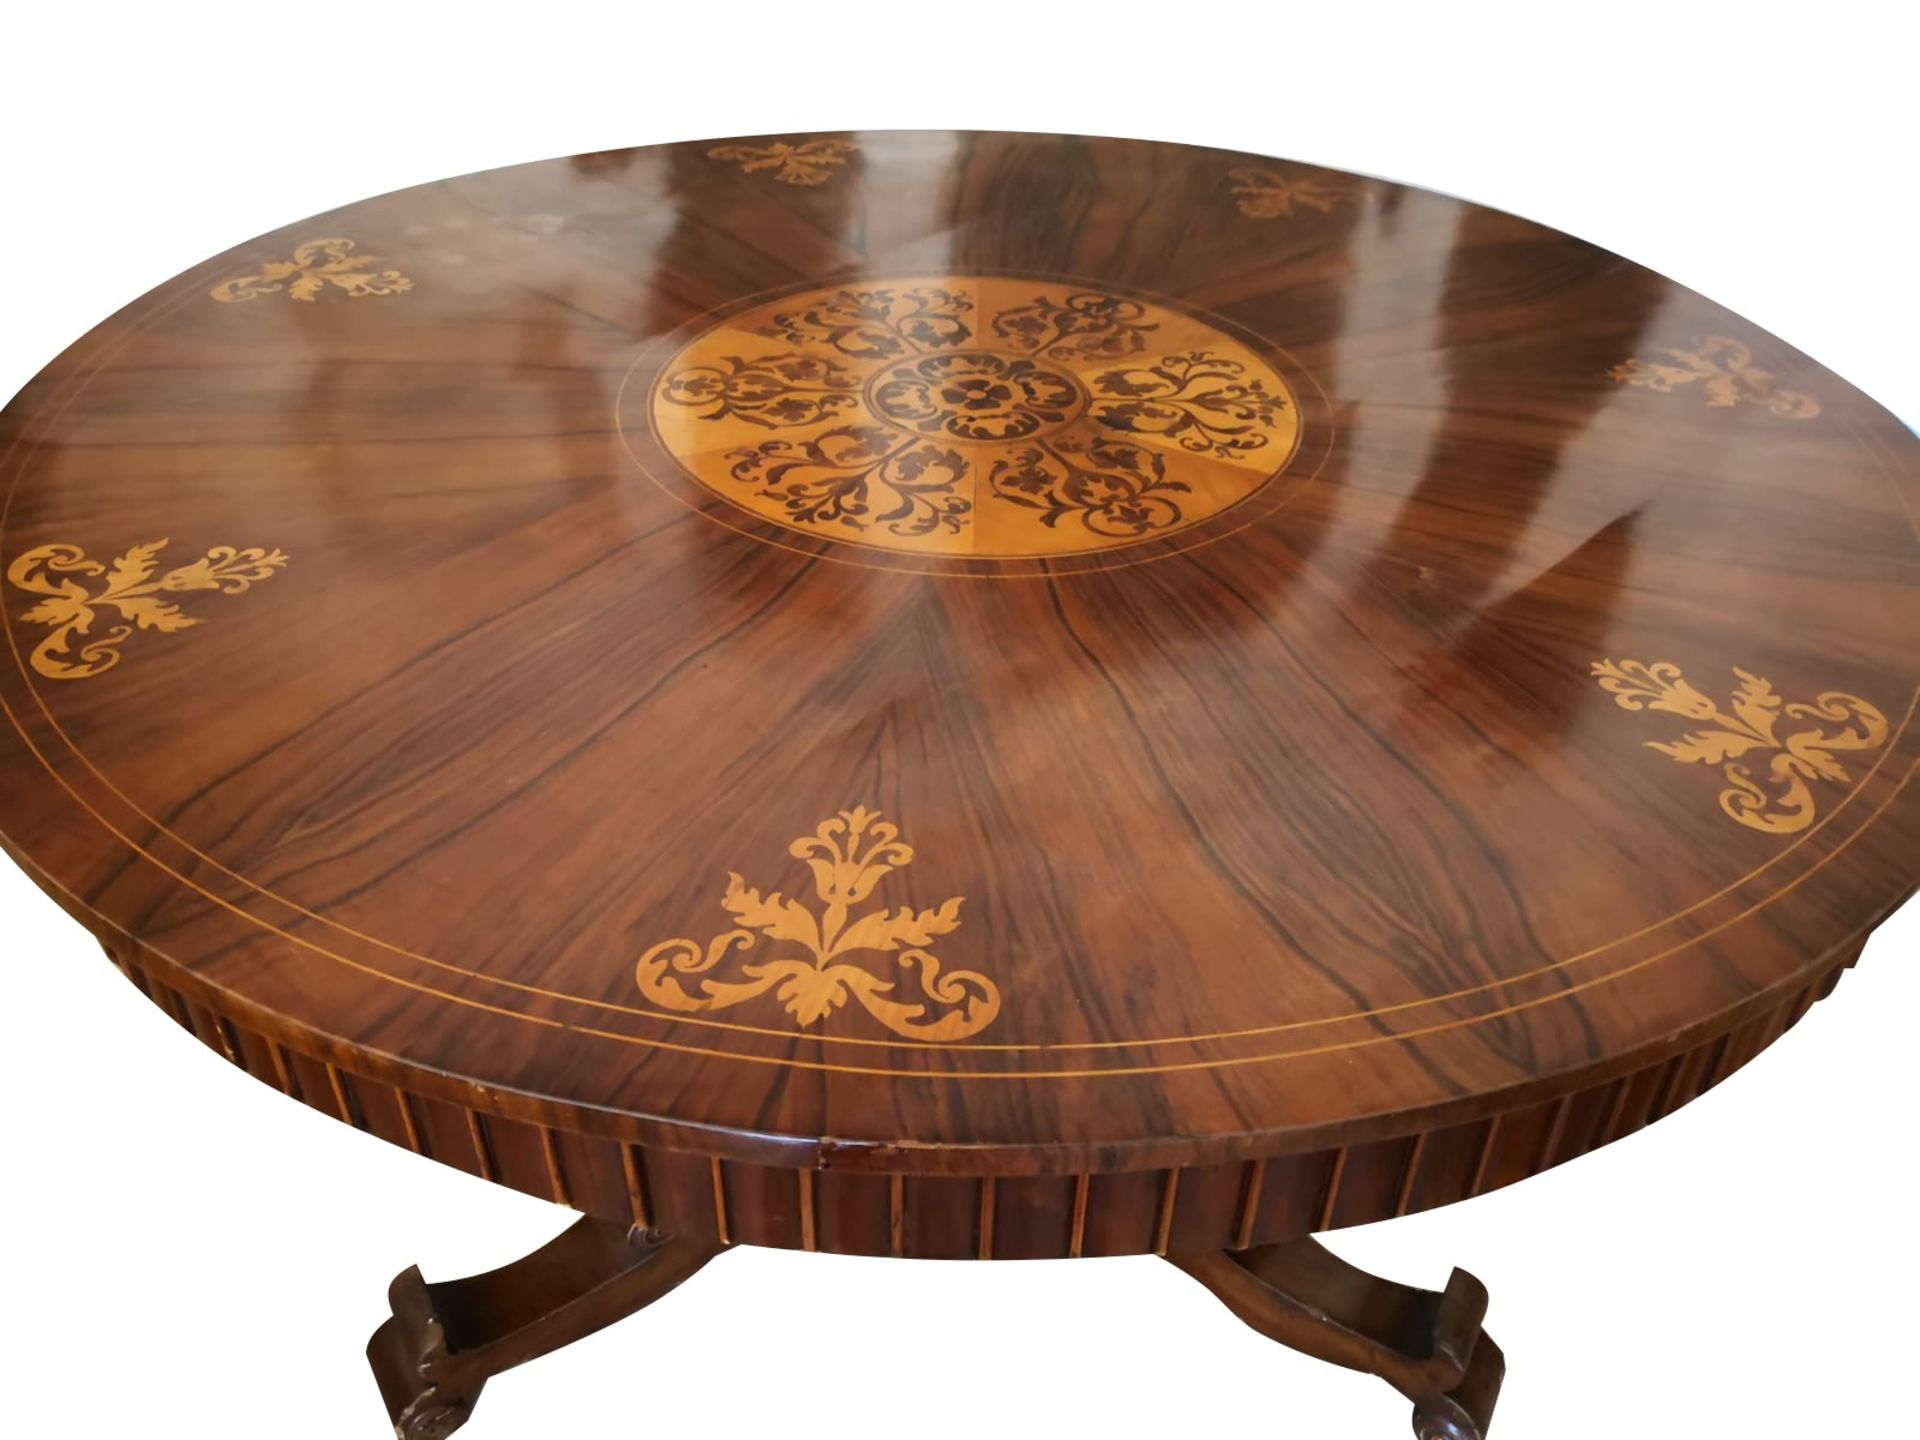 Round table inlaid with floral motifs, 19th century - Image 2 of 4